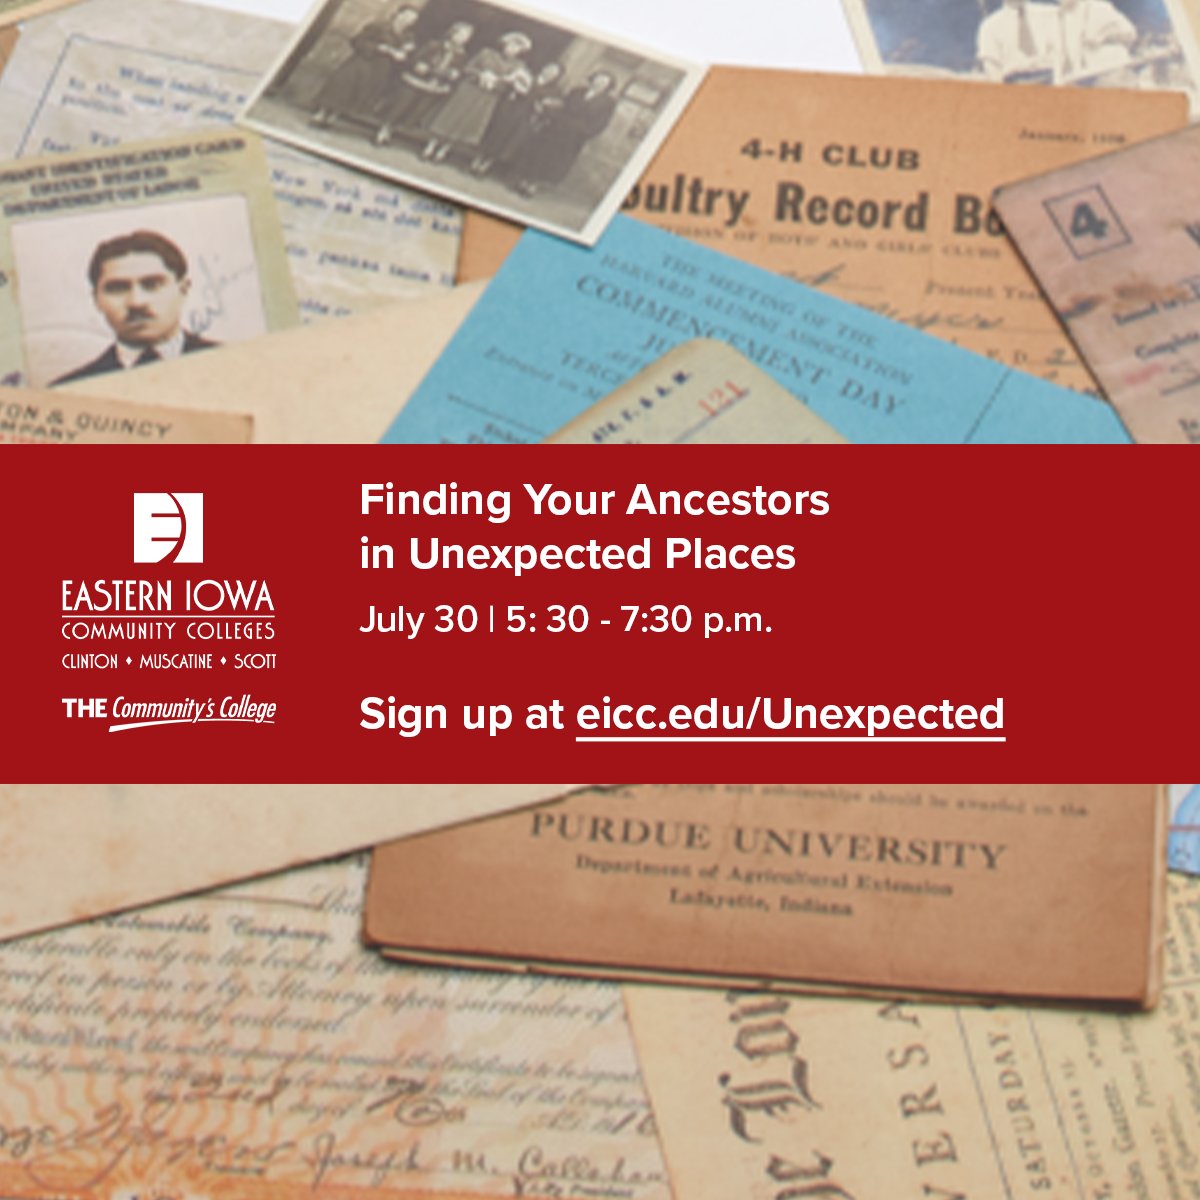 School and church records, legal documents, family bibles, maps, and newspaper articles are all types of records that can be used to understand your family history.

Sign up now at eicc.edu/Unexpected. #THECommunitysCollege #Genealogy